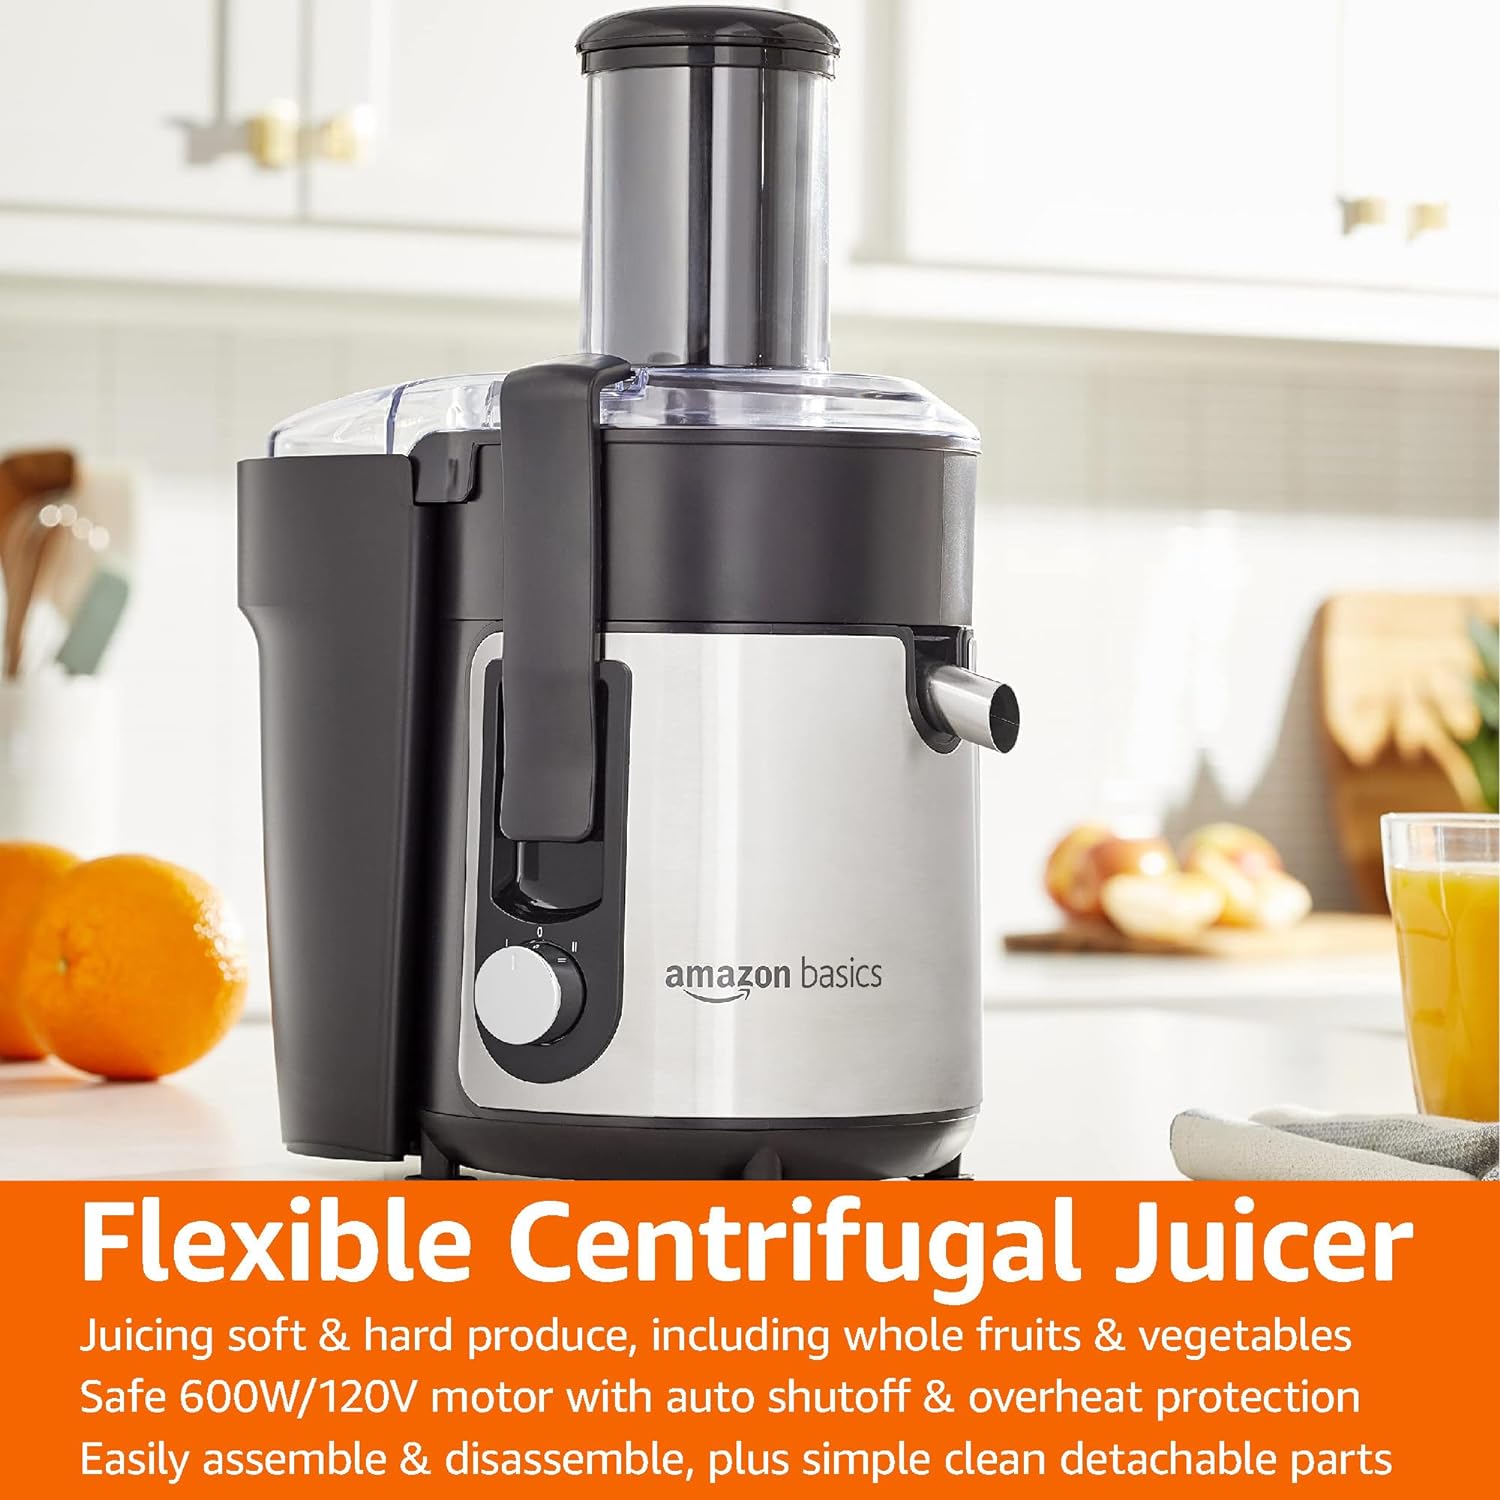 Amazon Basics Wide-Mouth Juicer Review